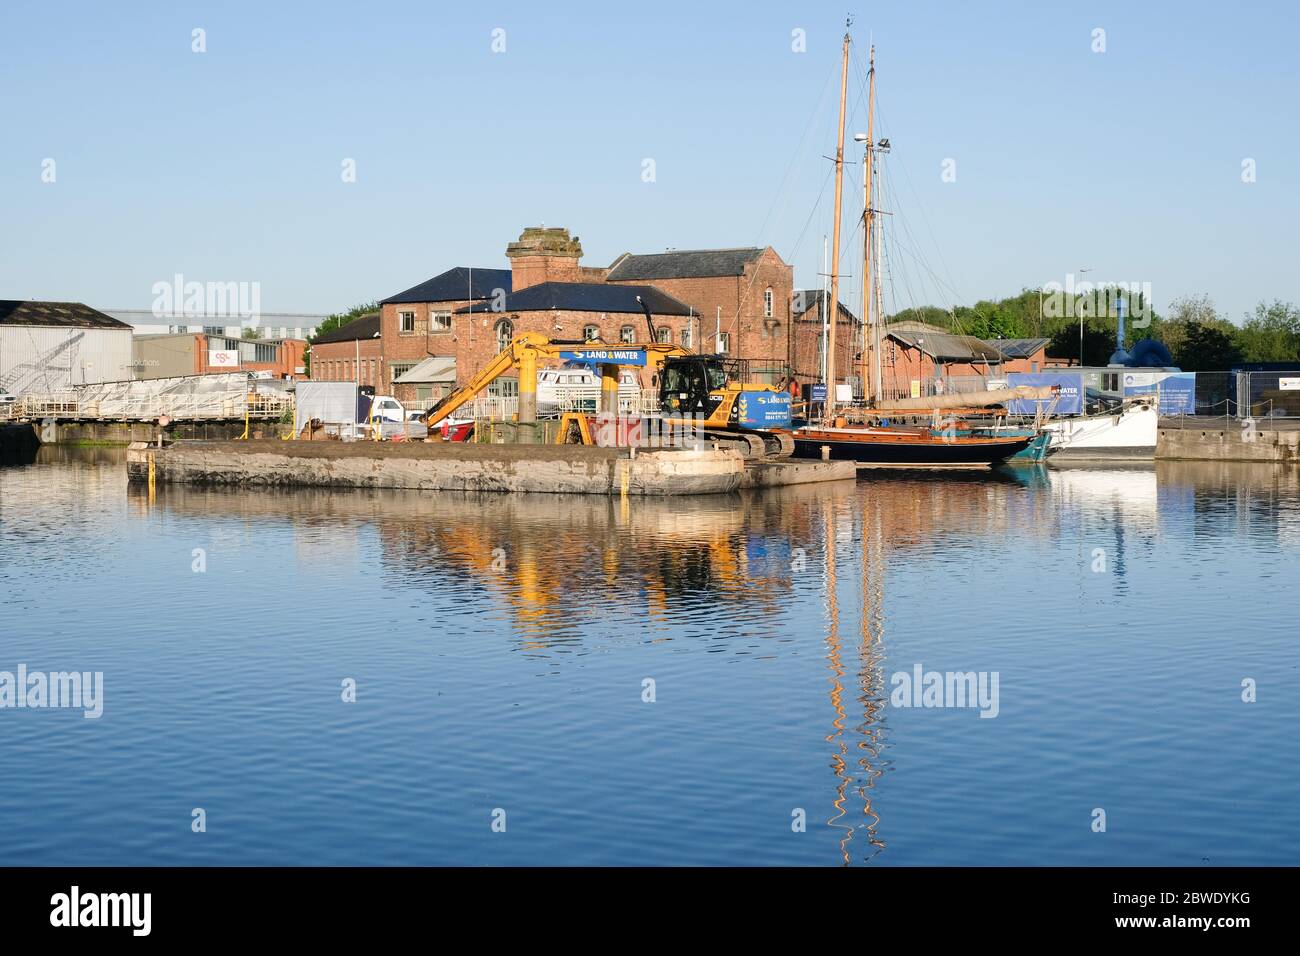 Images from the Main Basin of Gloucester Docks at the northern end of the GLoucester and Sharpness Canal Stock Photo